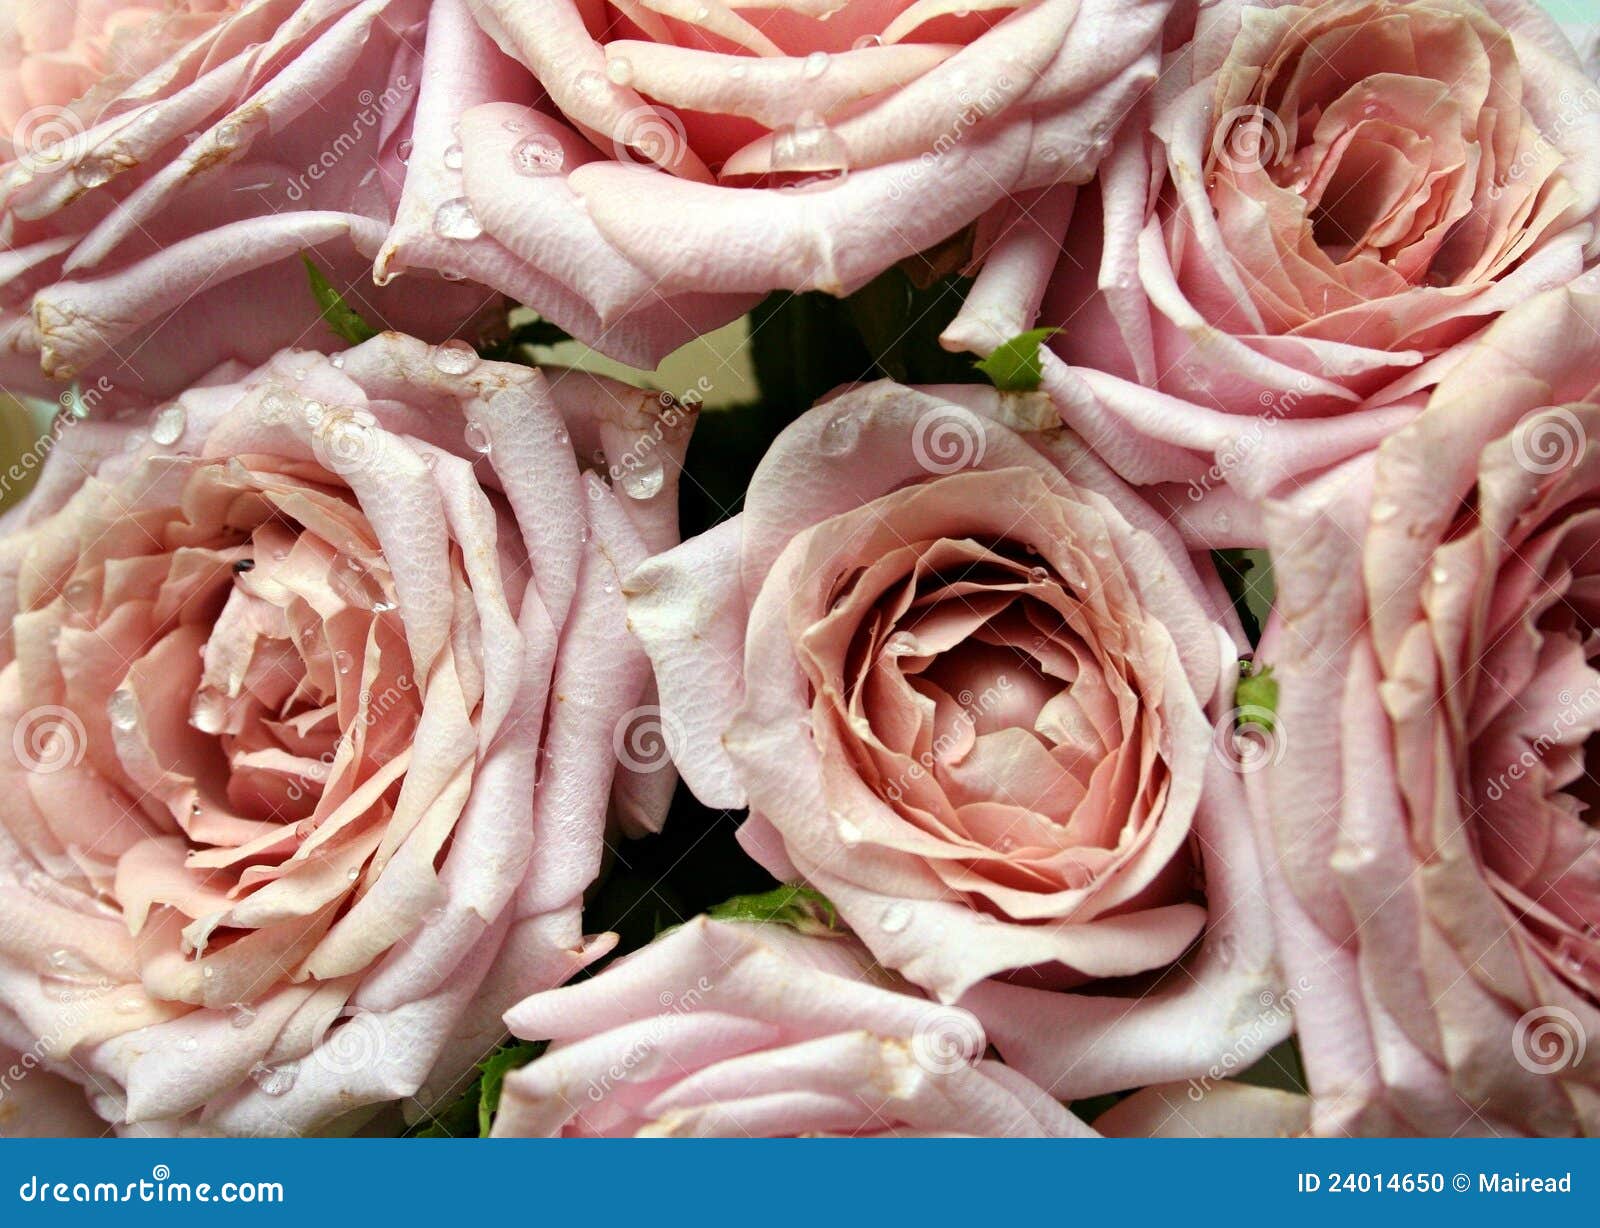 bouquet of pink roses with dew